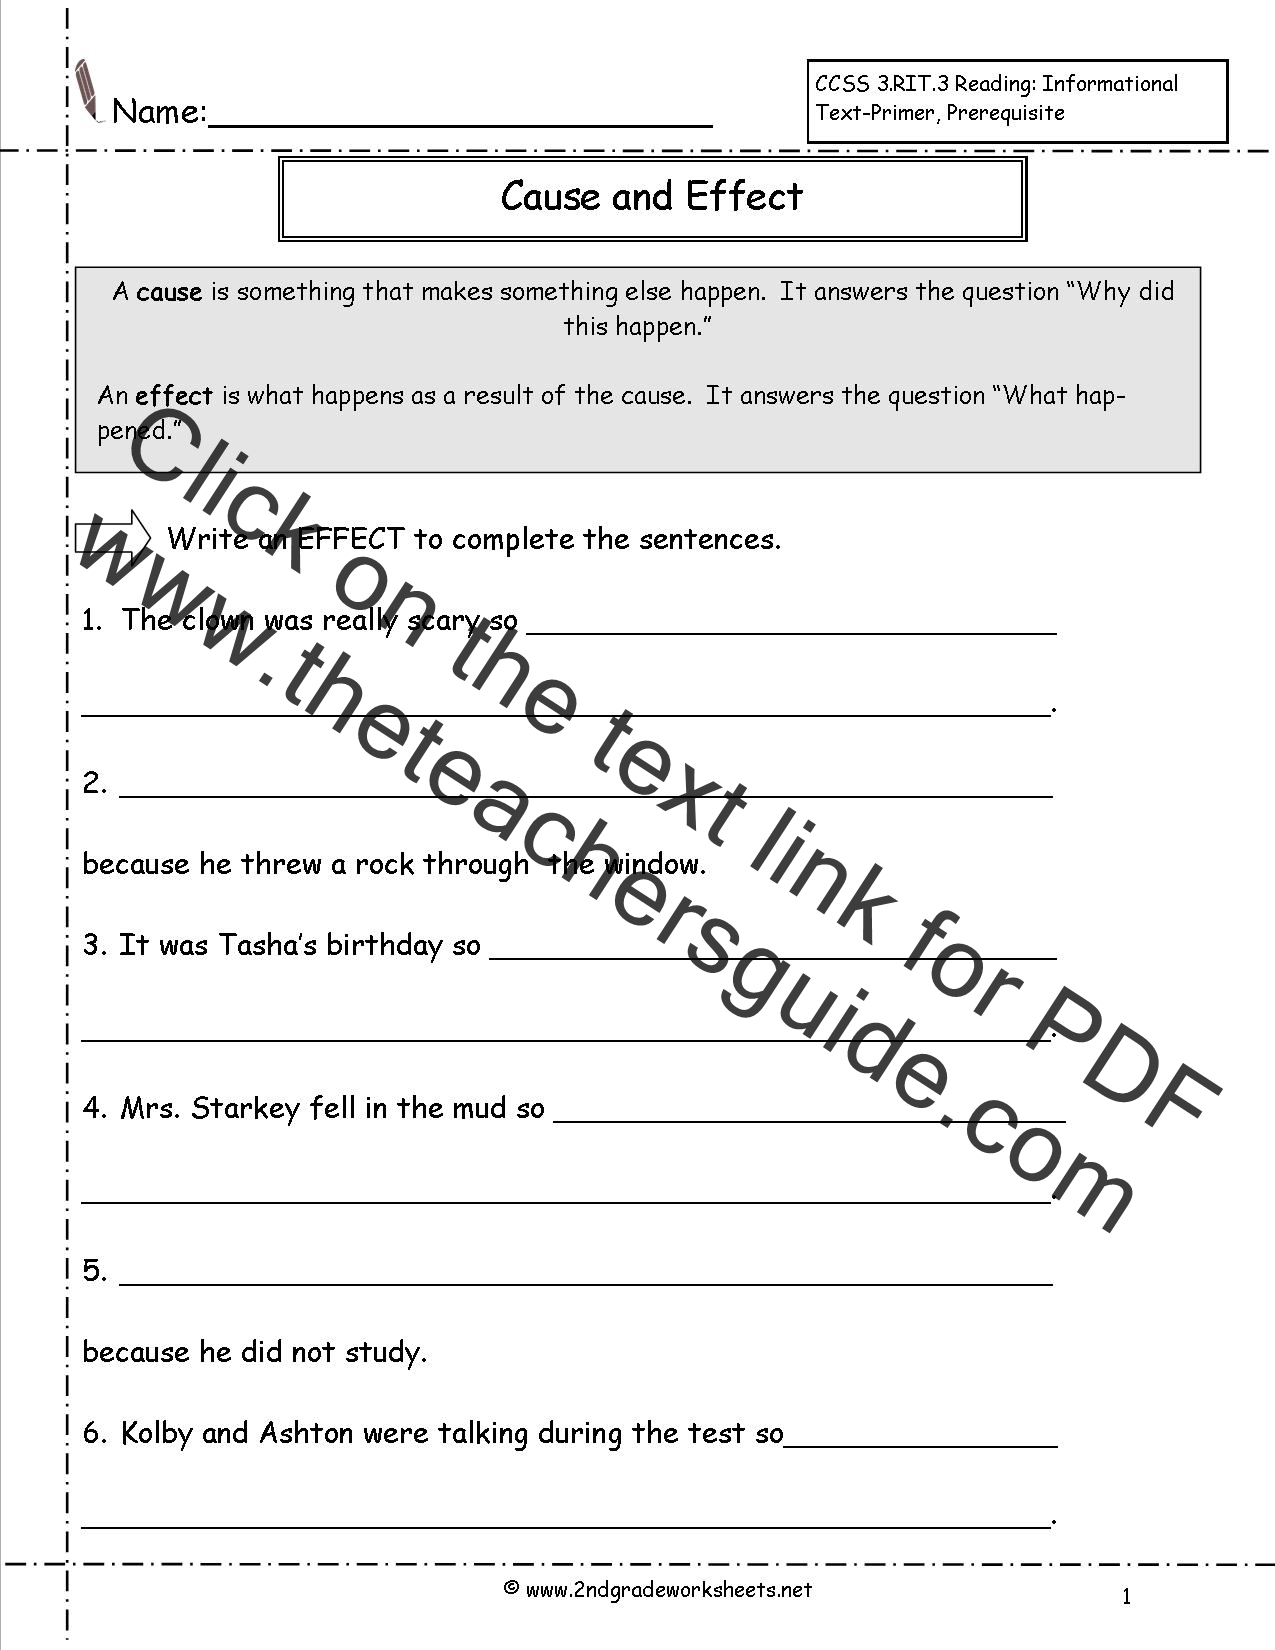 cause and effect worksheets 6th grade free